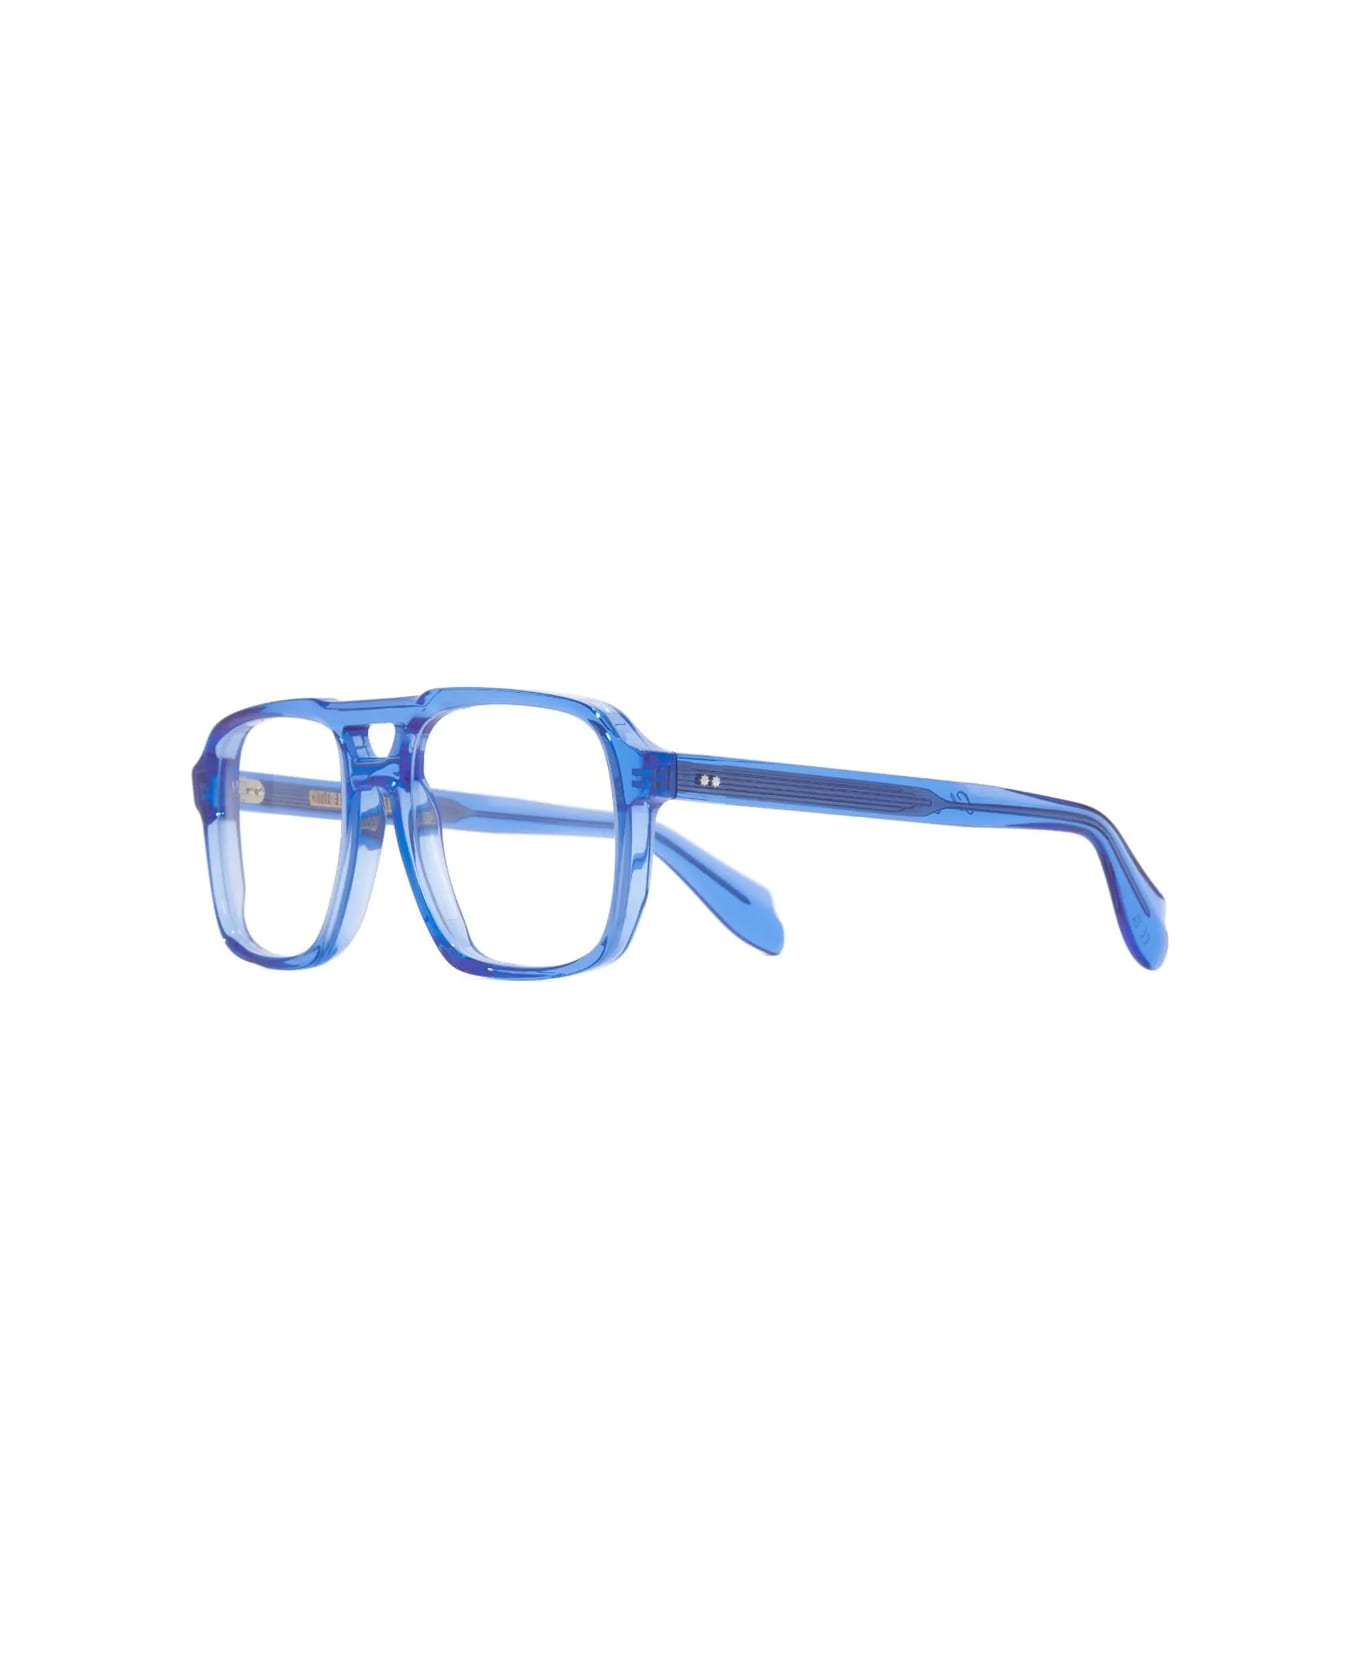 Cutler and Gross 1394 A7 Glasses - Blu